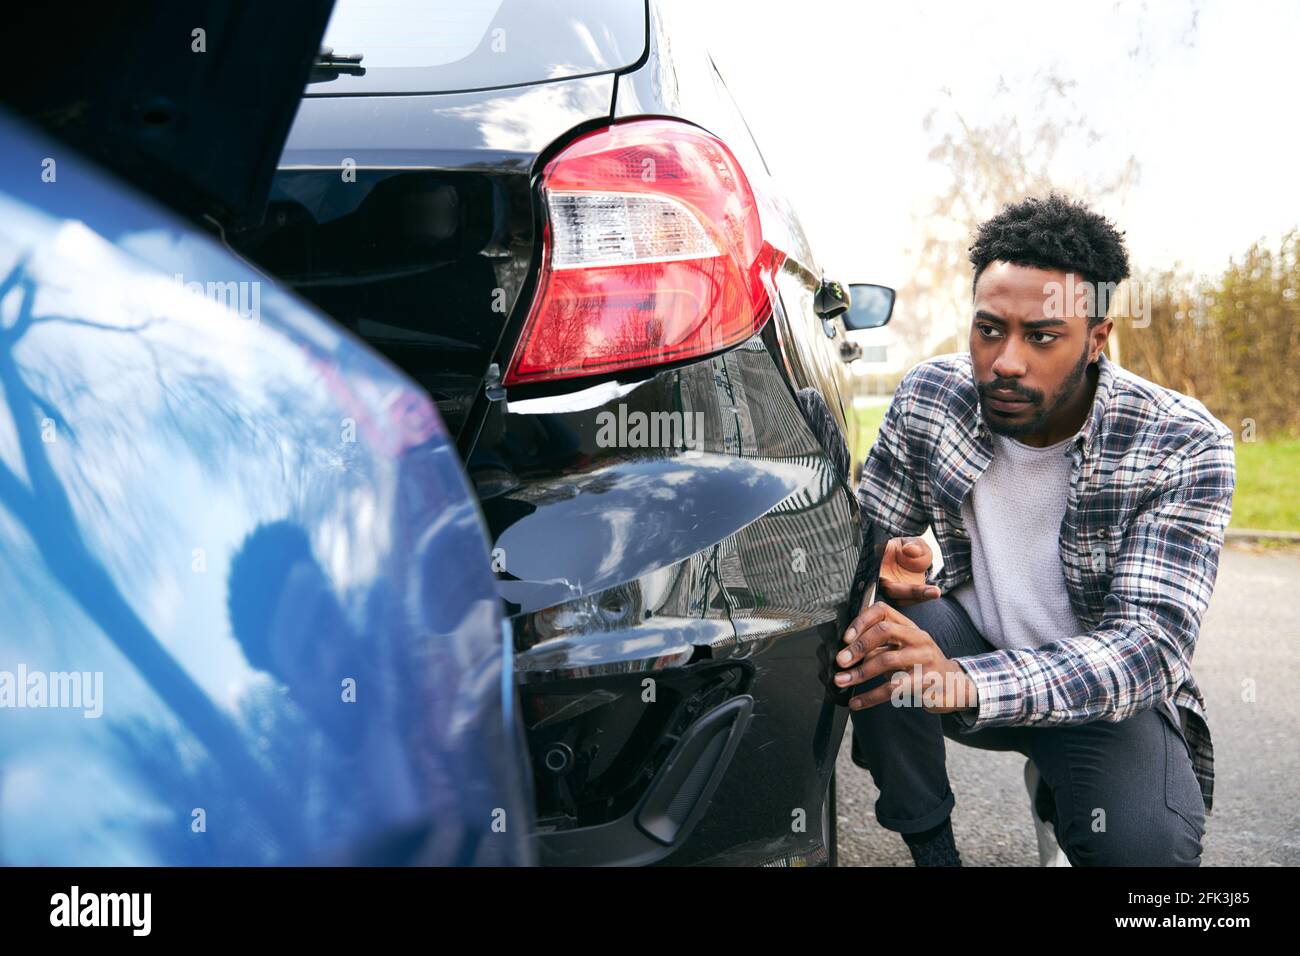 Angry young man standing by vandalised car in car park reporting damage to insurance company using mobile phone Stock Photo